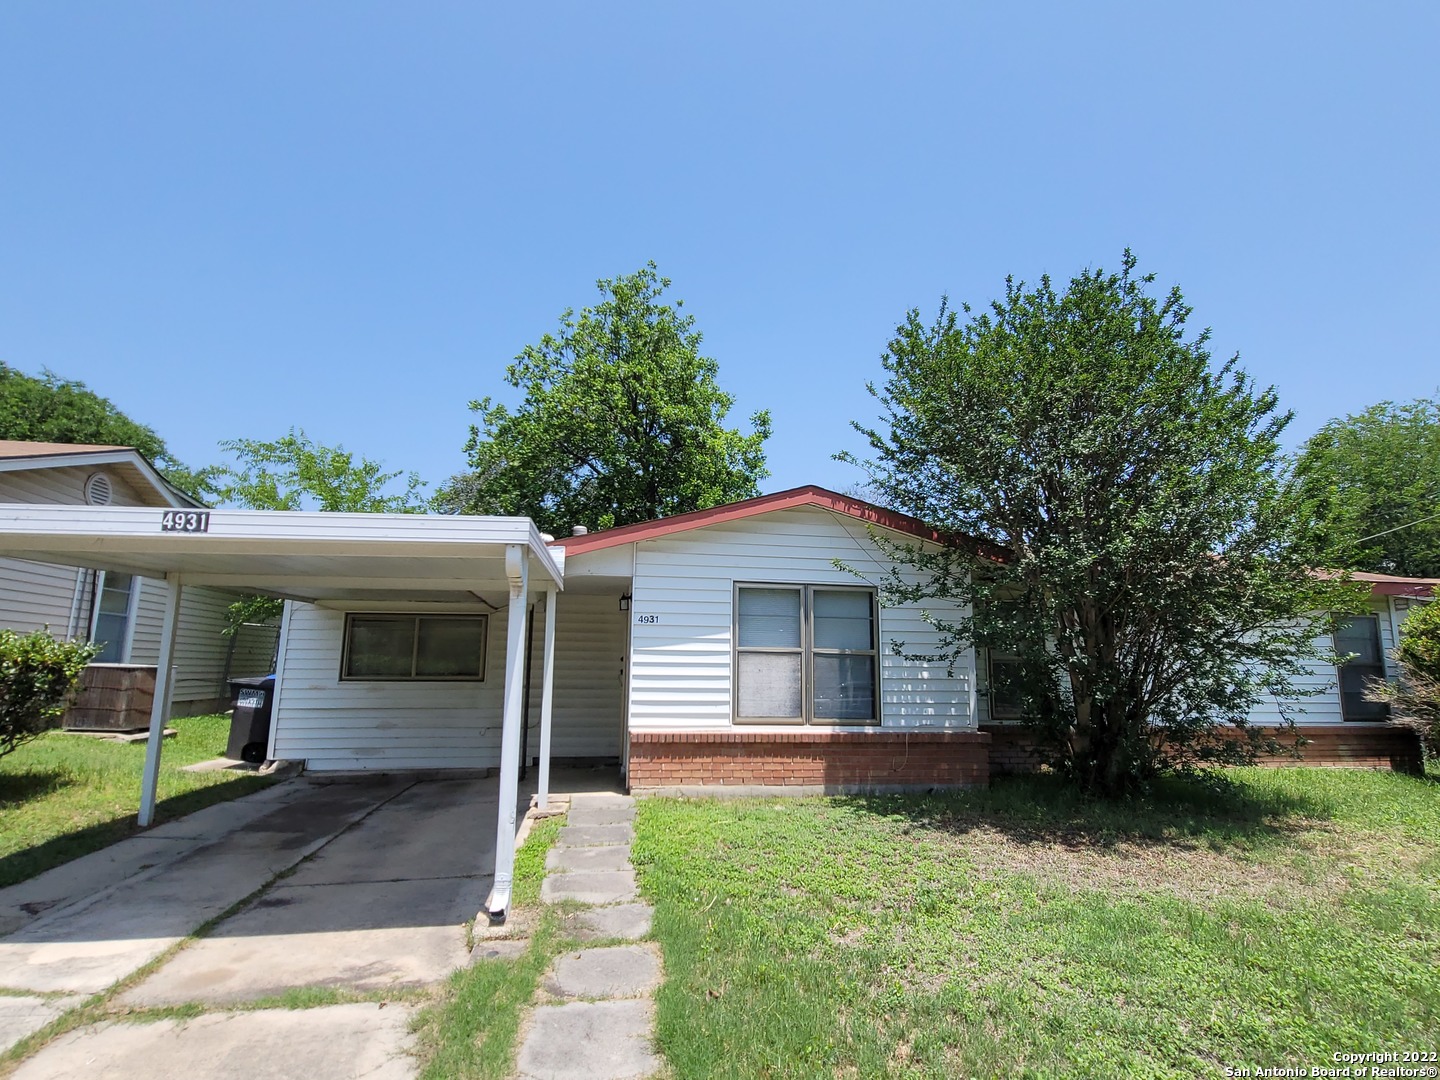 Great starter home or perfect investment property.  3 bedroom 1 bath with converted garage, all tile flooring and open floor plan.  Large fenced  yard with carport.